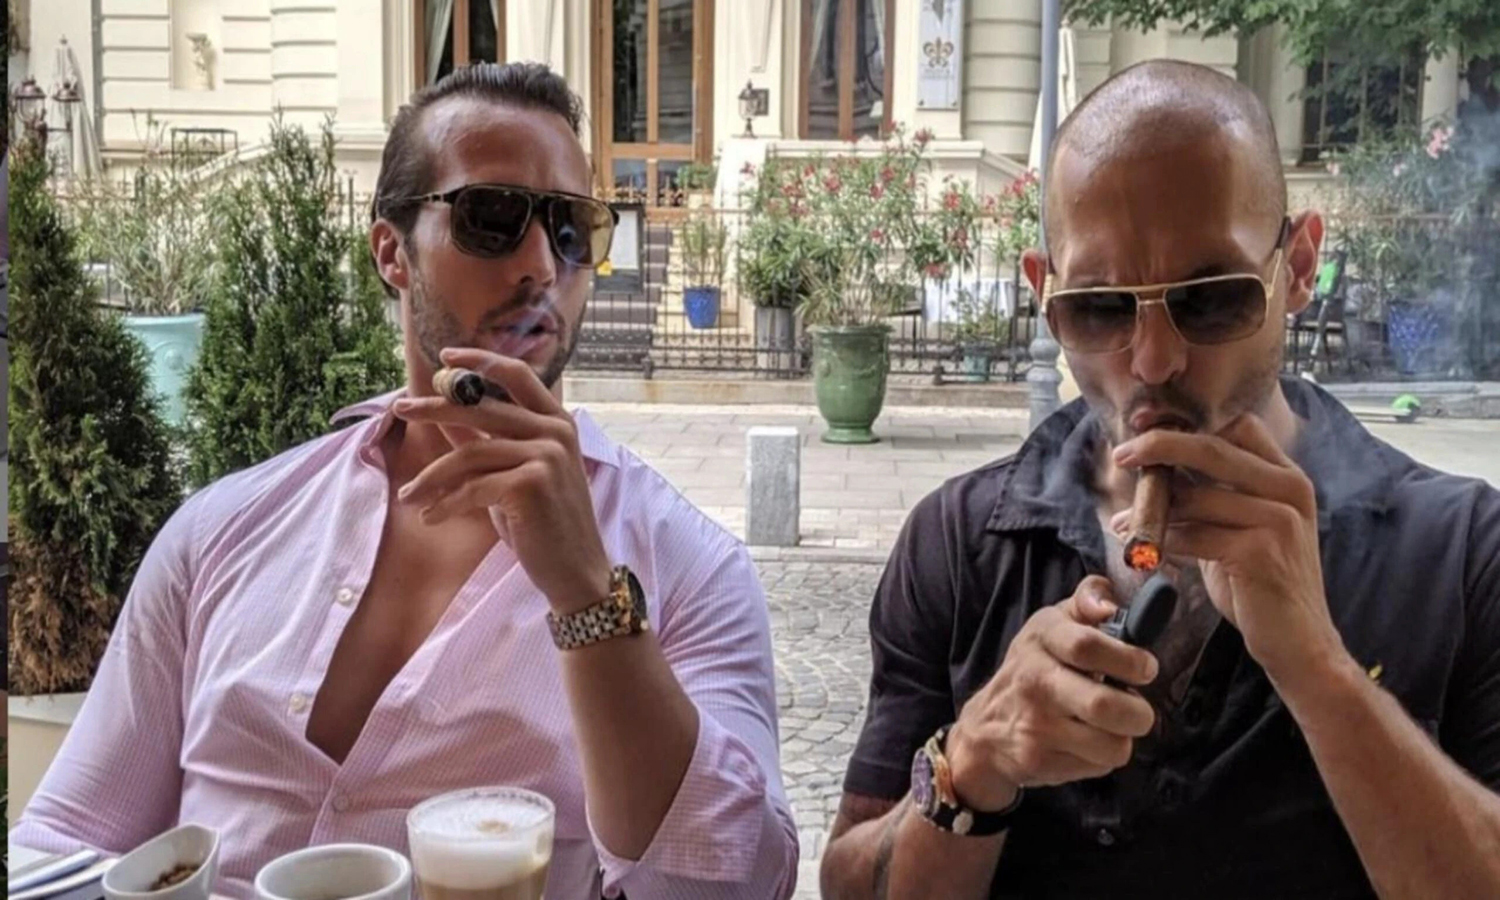 Cigars increase your dopamine levels in your brain